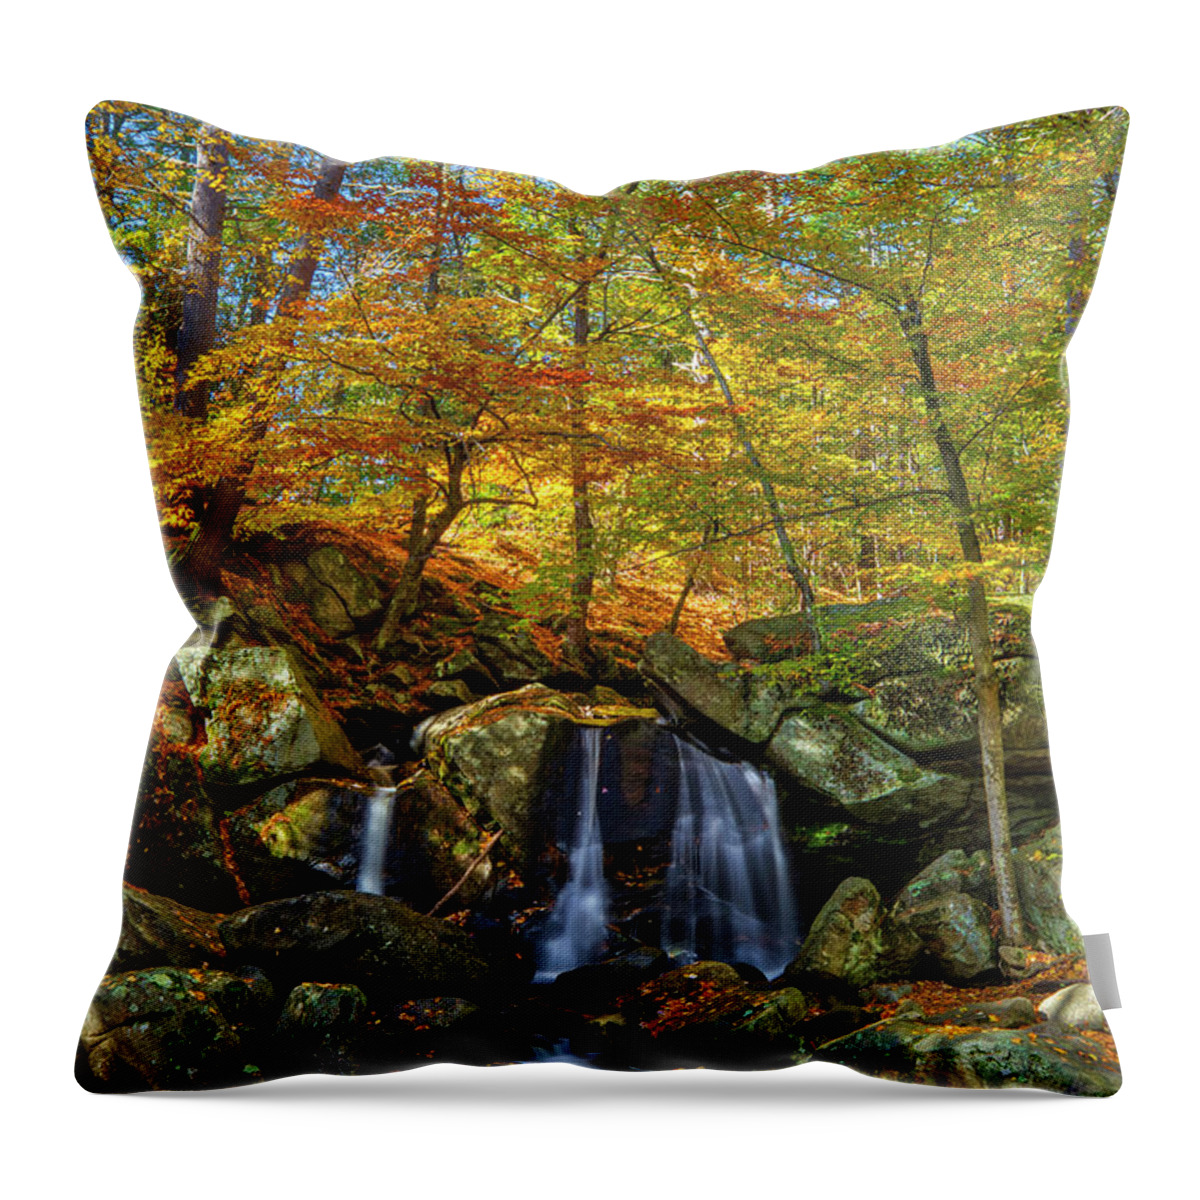 Trap Falls Throw Pillow featuring the photograph Trap Falls by Juergen Roth